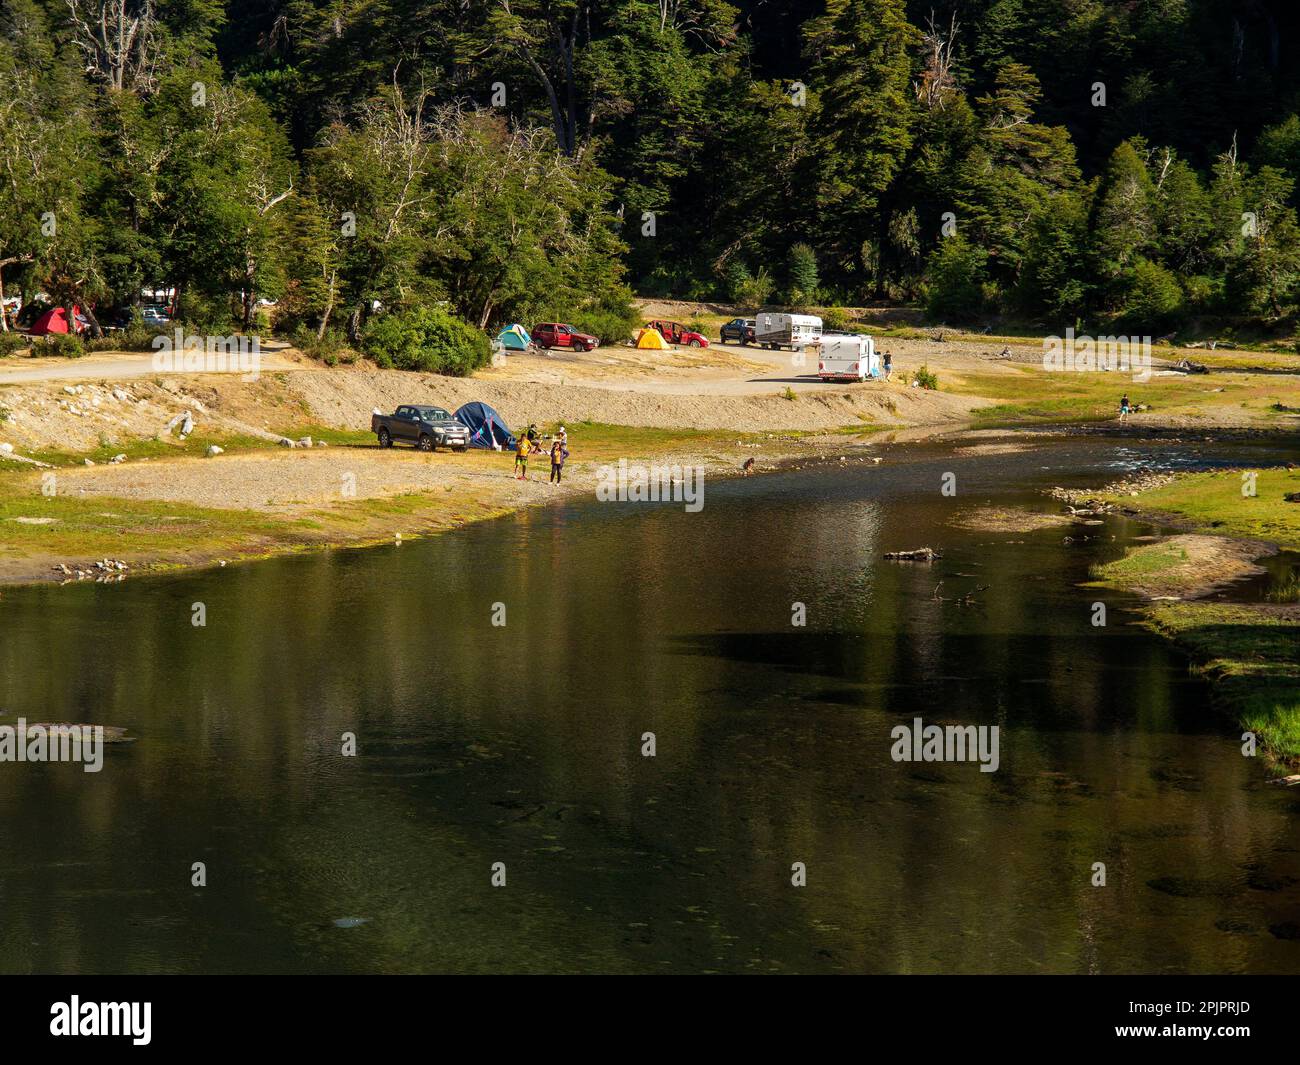 Camping site on the banks of the Pichi Traful river, Nahuel Huapi Park, Seven Lakes Road, Neuquén Province, Argentina Stock Photo